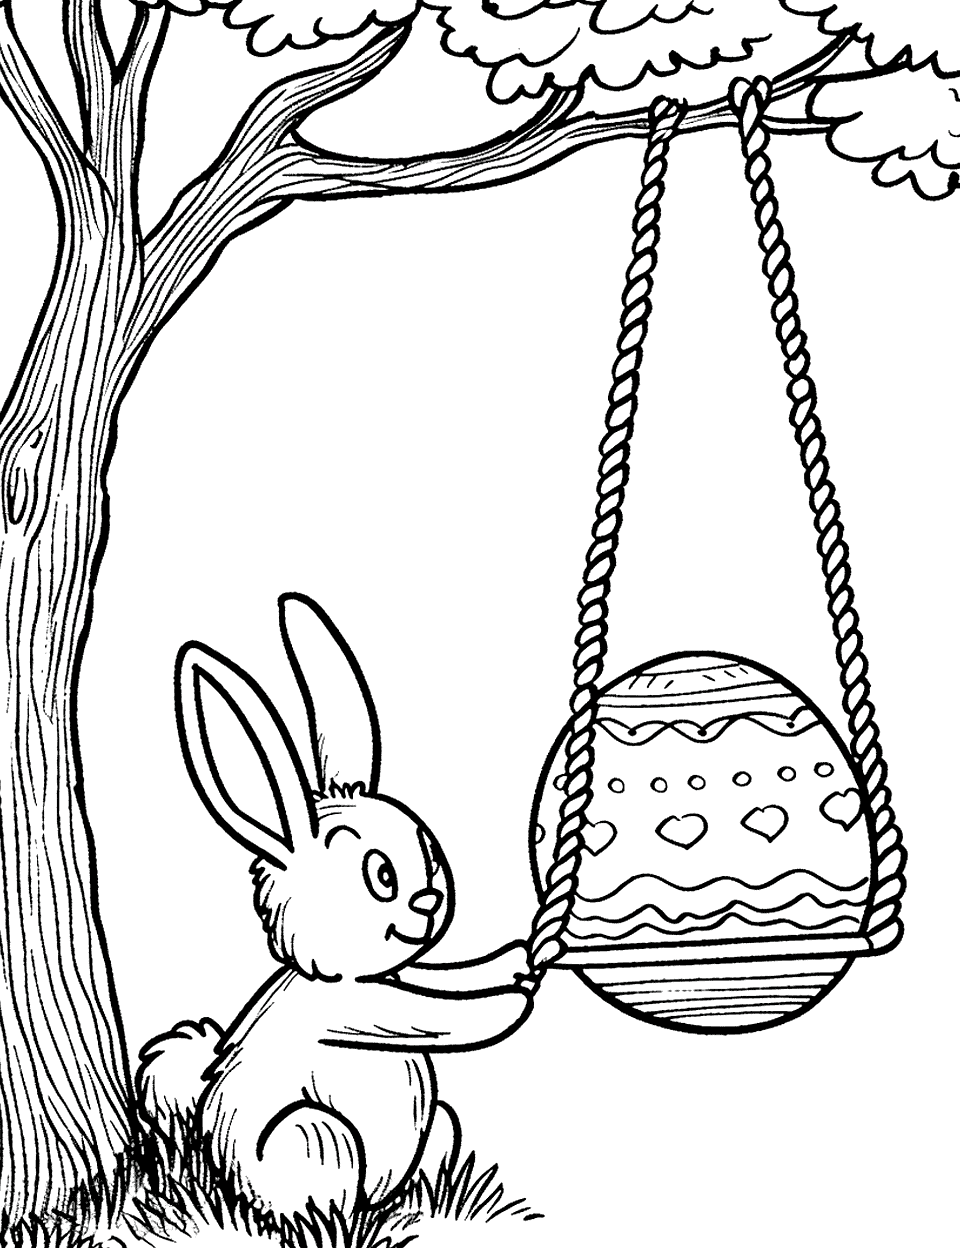 Easter Egg on a Swing Bunny Coloring Page - A bunny gently pushing an Easter egg on a swing, under a tree.